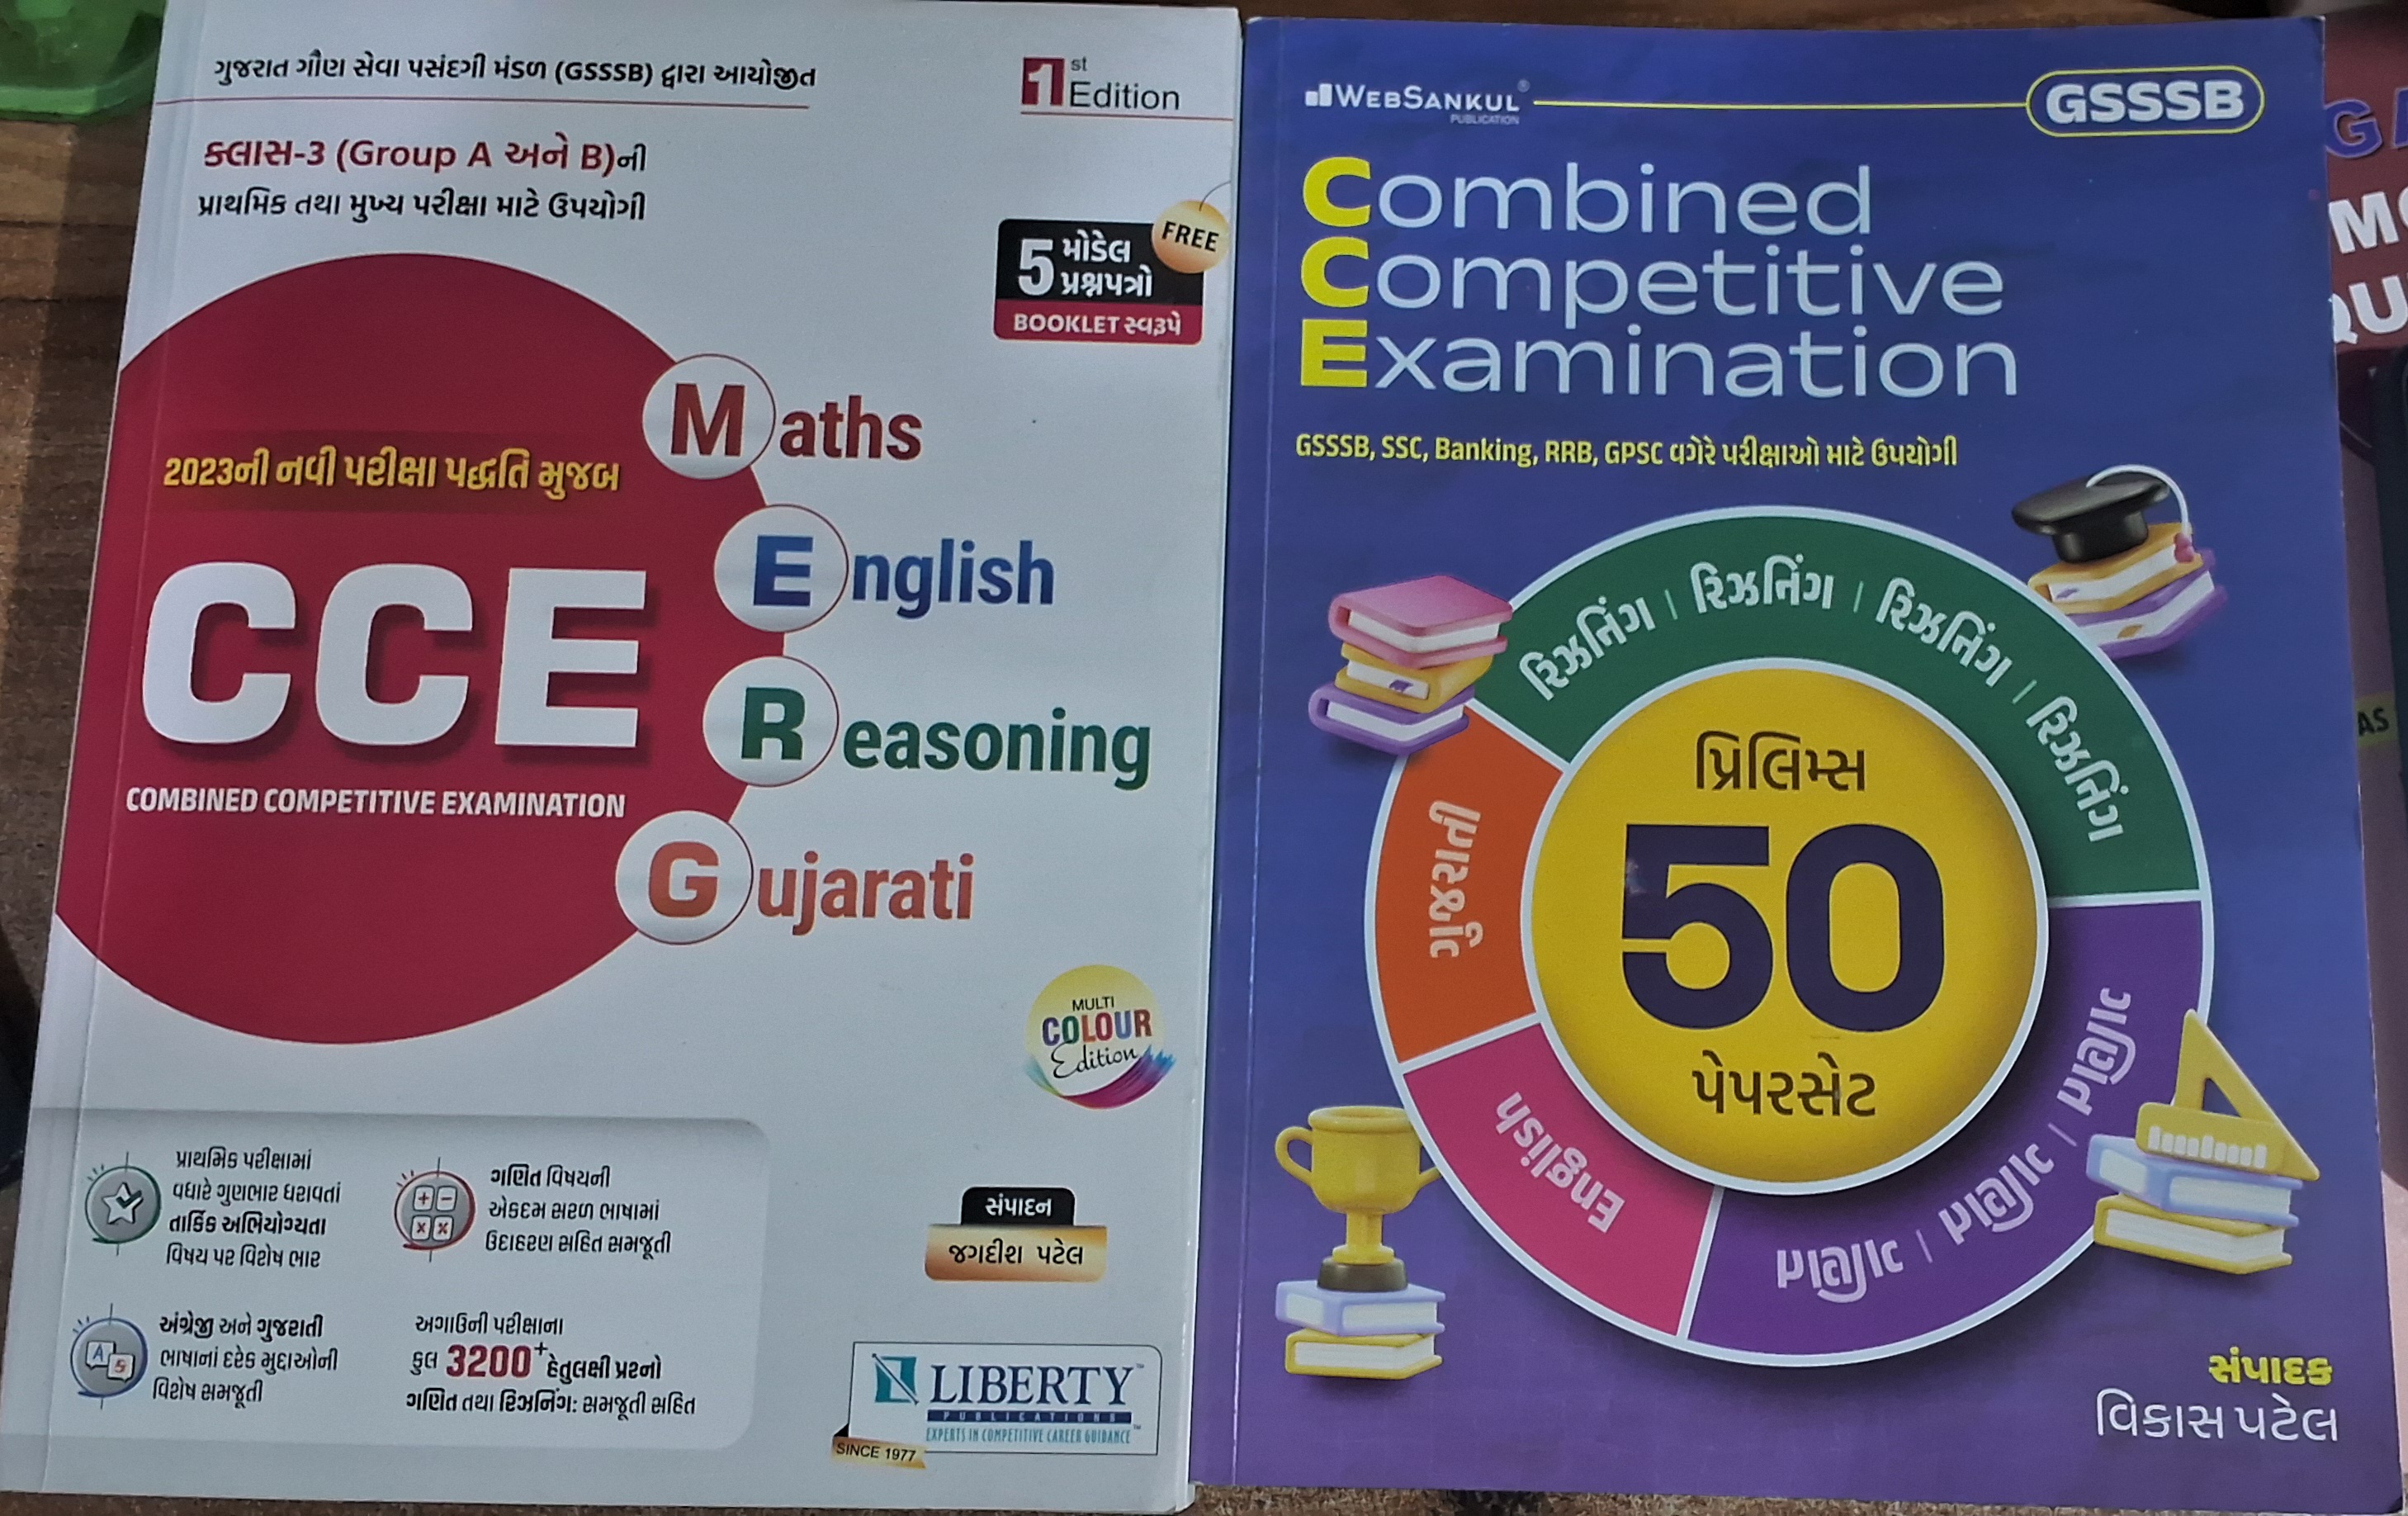 2-book,cass-3,  - Cce,, Maths,eng,reaso,gujarati,& 50 Papers Set, -2023